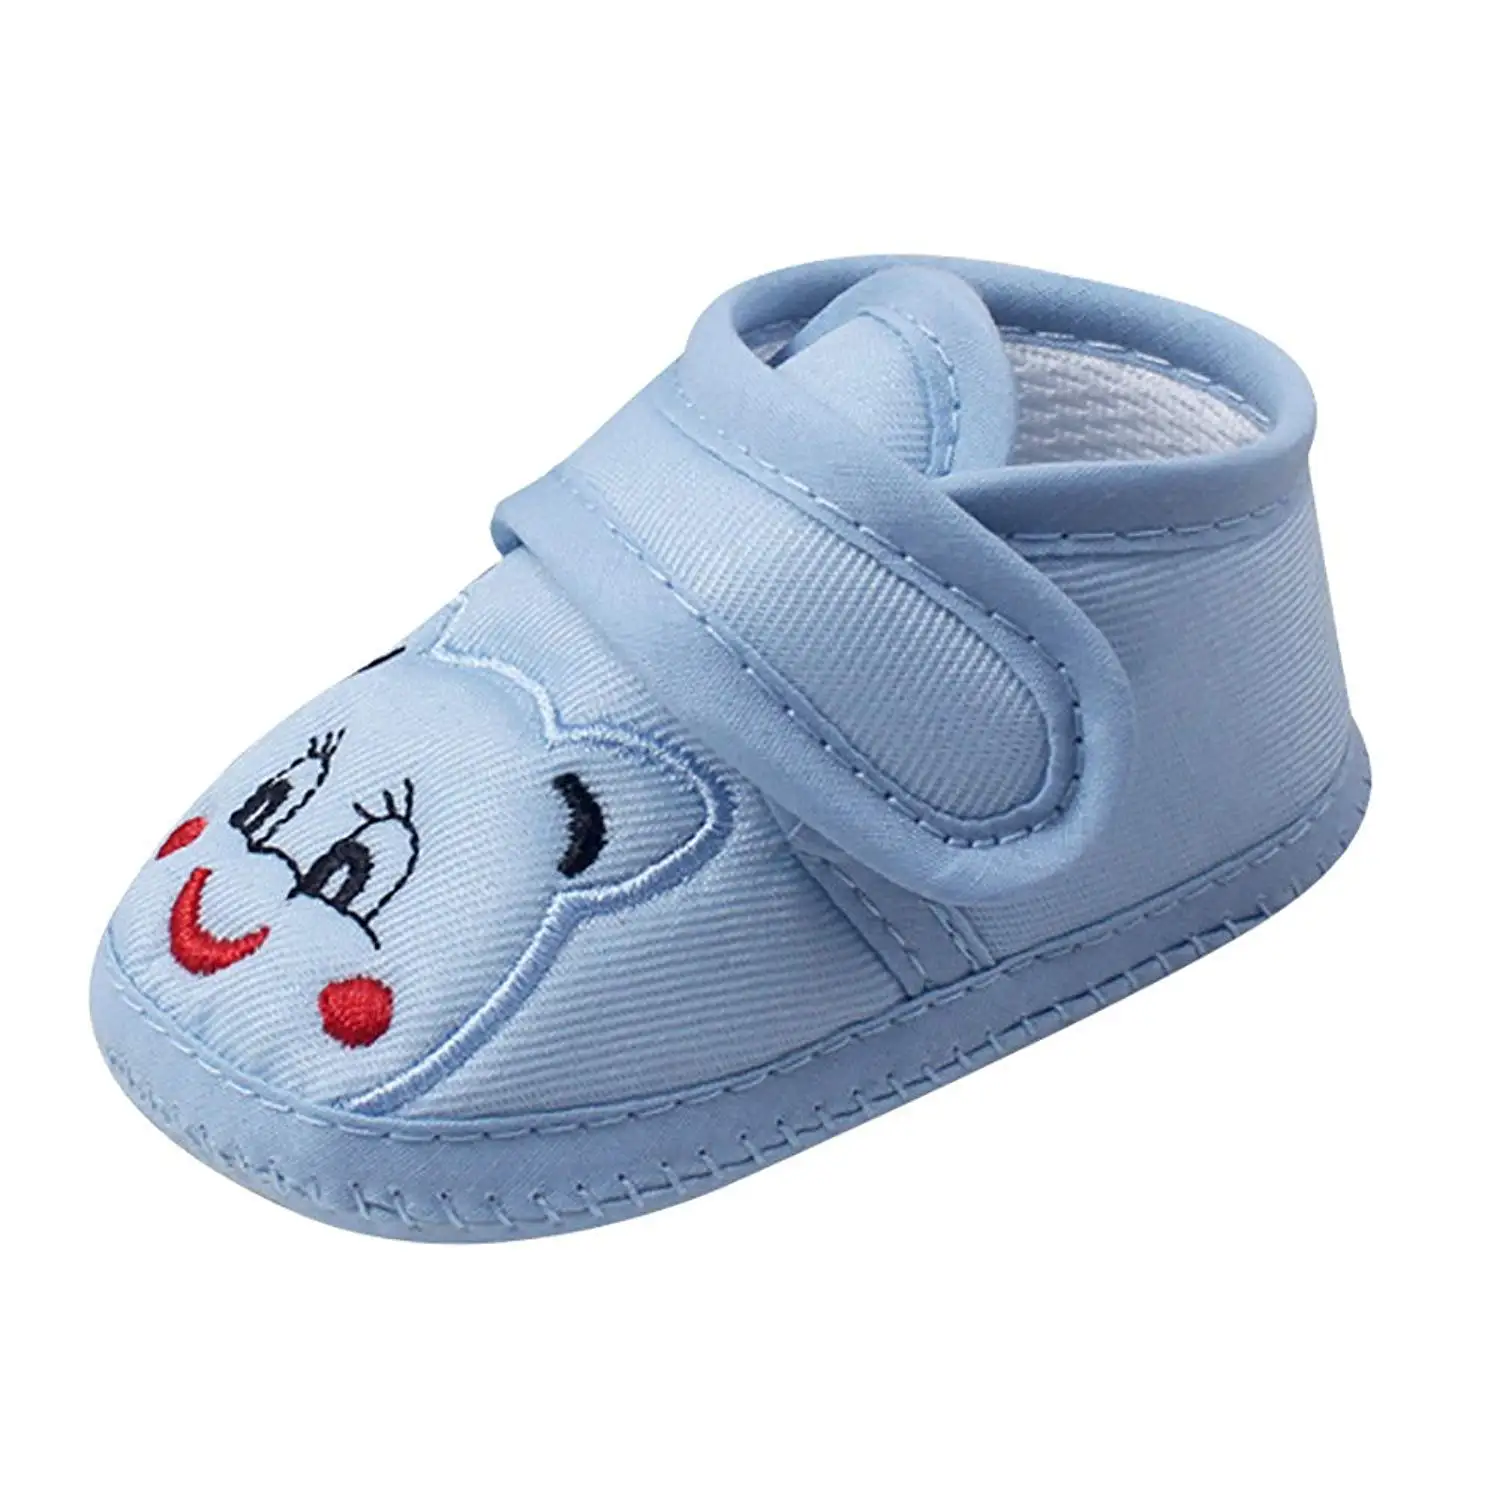 SAYOYO Football Baby Soft Sole Prewalkers Baby Toddler Shoes